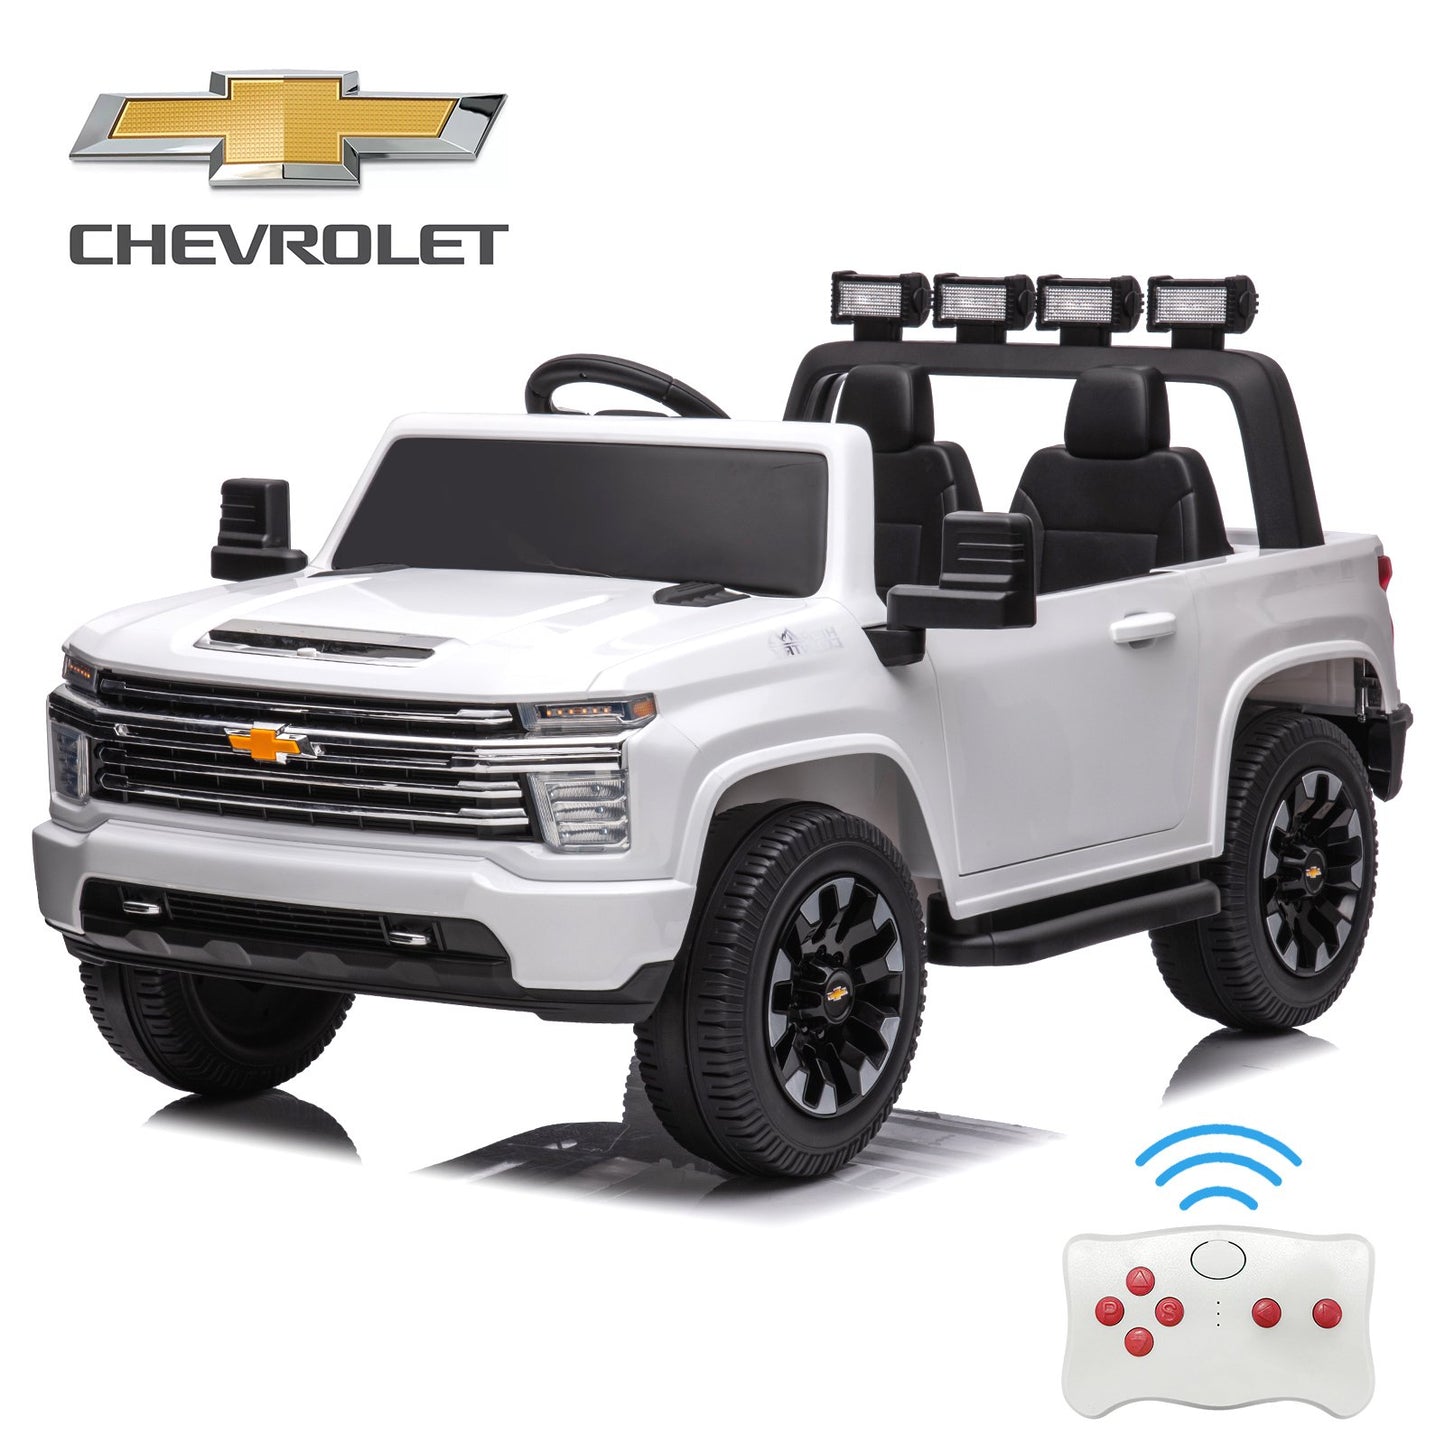 iYofe SILVERADO 12V Battery Powered Car Toy for Girls Boys, Kids Ride on Car for 3 4 5 Yrs with 2 Seats, Remote Control, LED Lights, MP3, Seat Belt, Electric Truck for Kids Birthday Gift, White